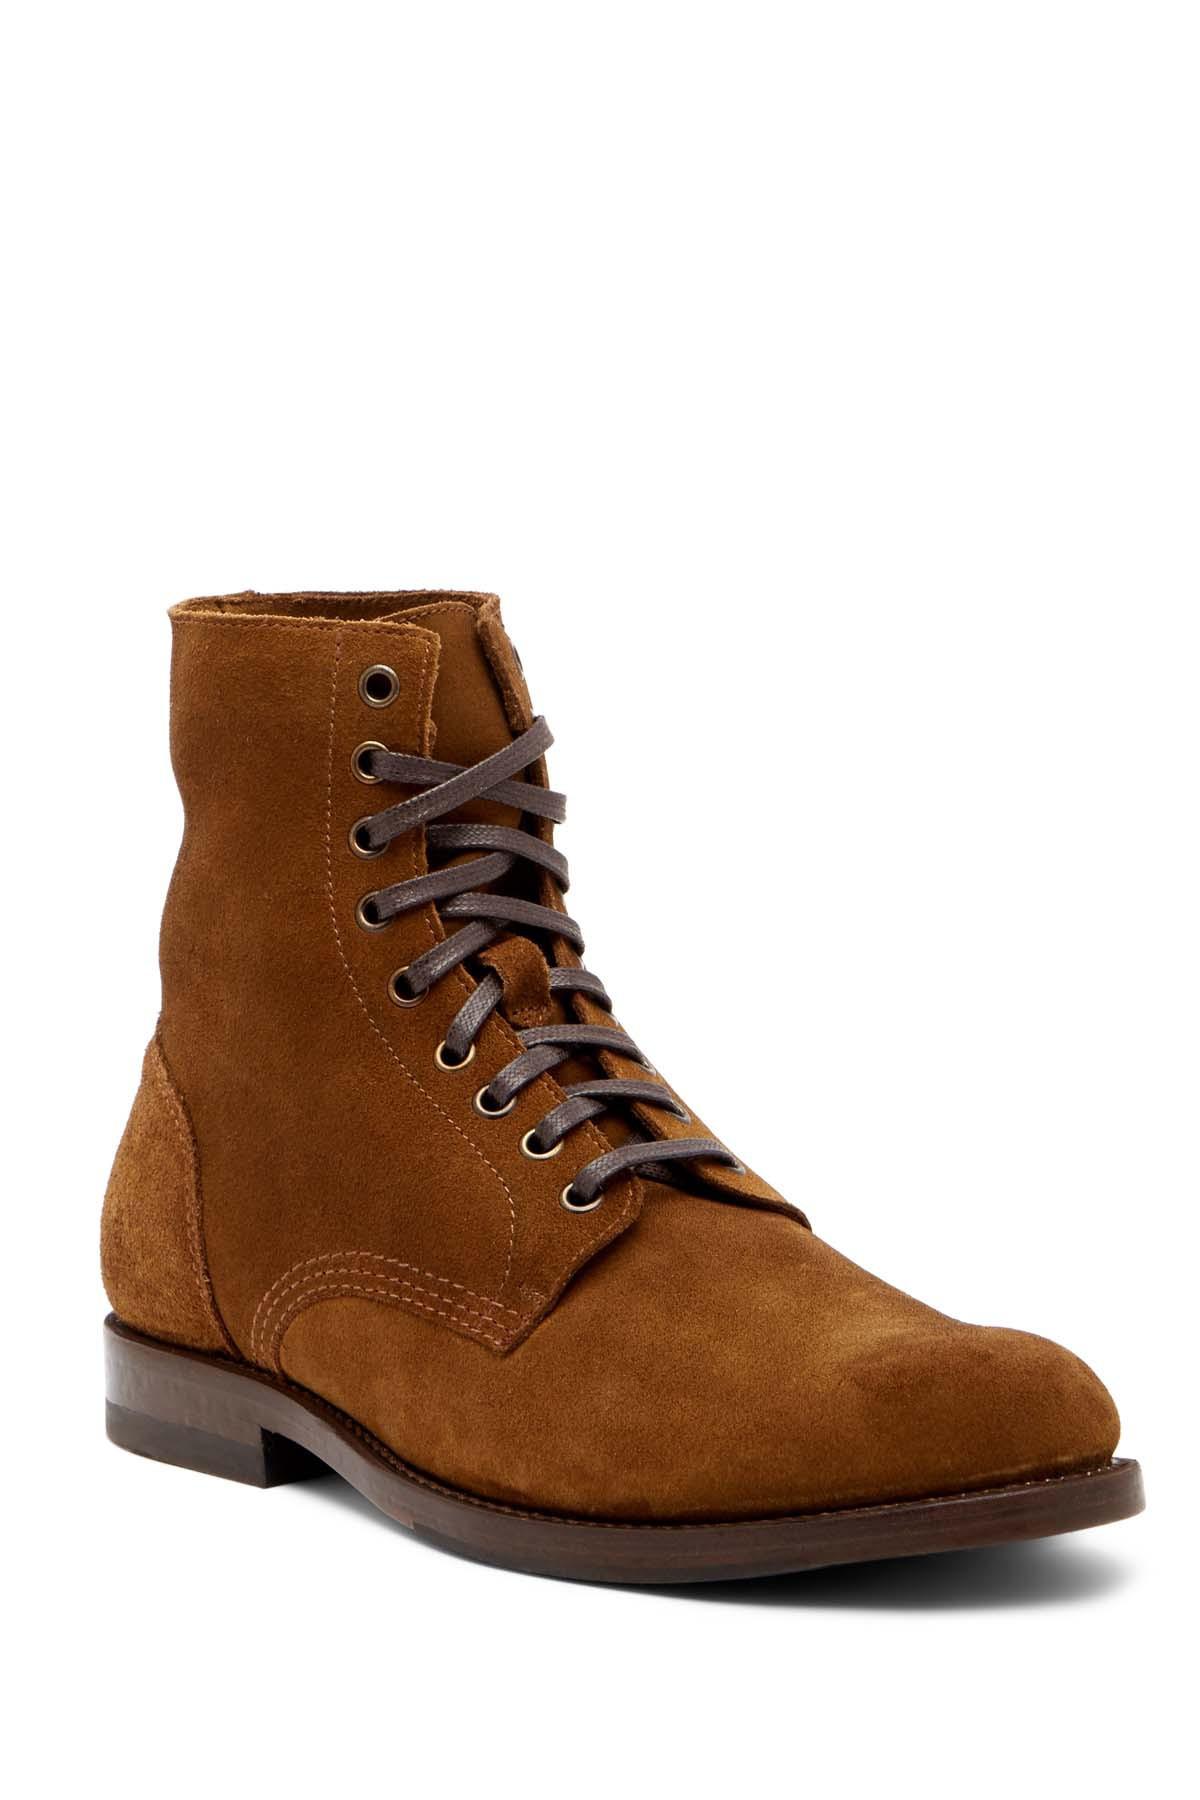 Lyst - Frye Will Lace-up Suede Boot in Brown for Men